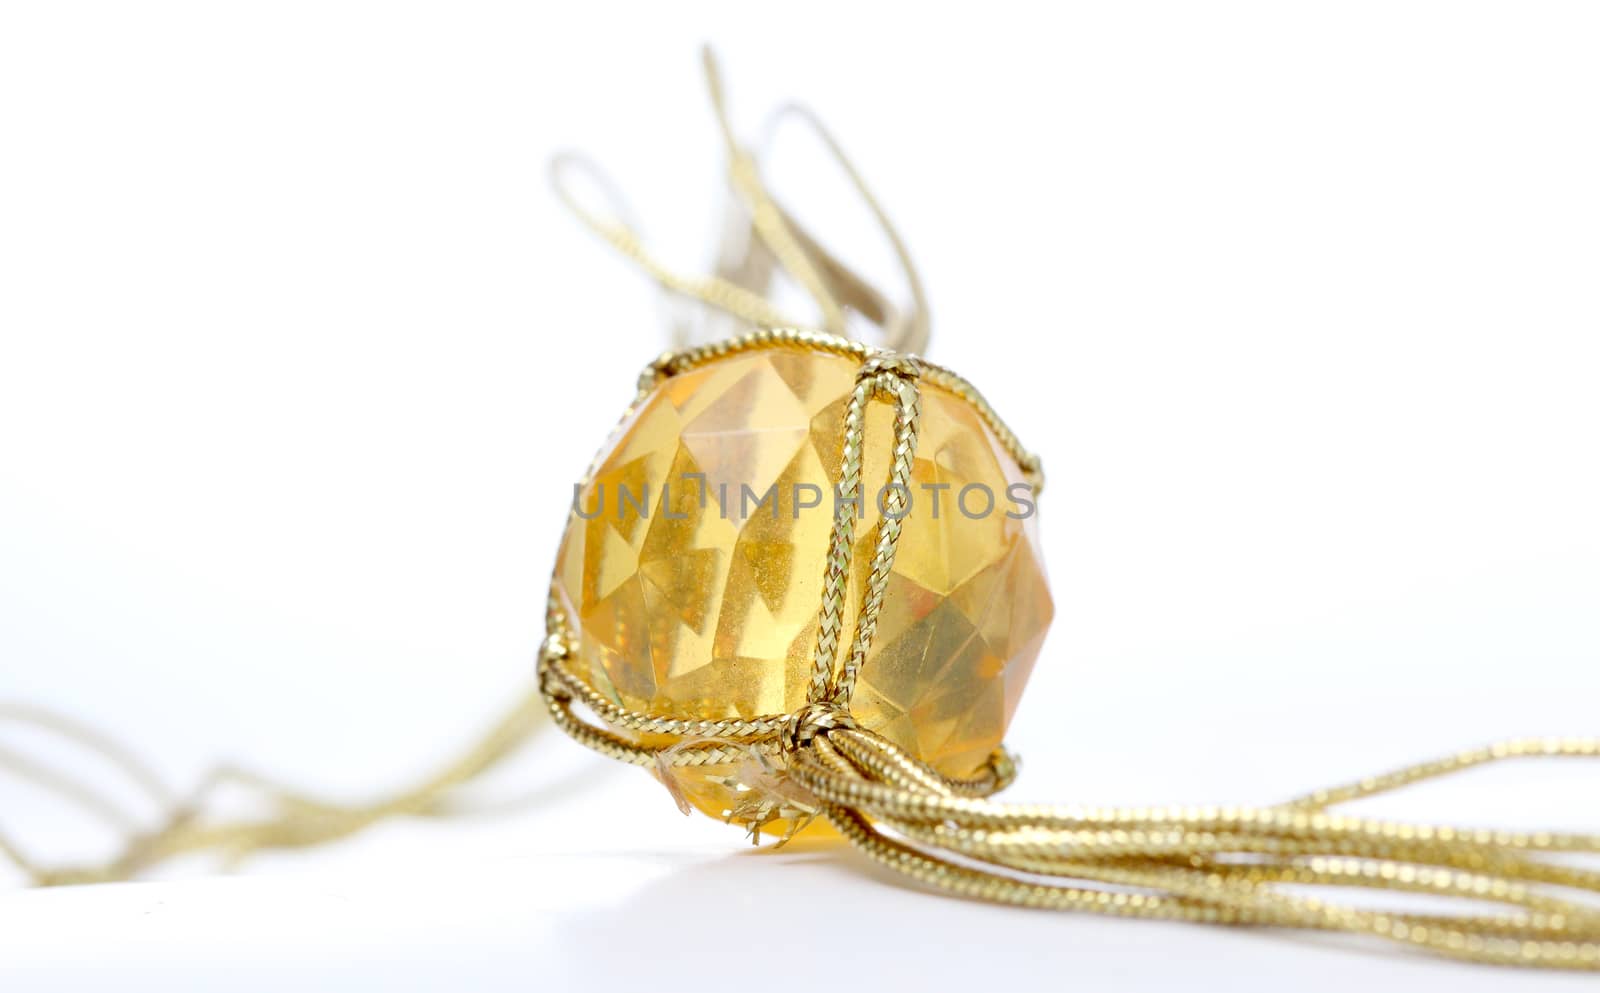 necklace with cheap plastic gems with golden colored rope by nehru